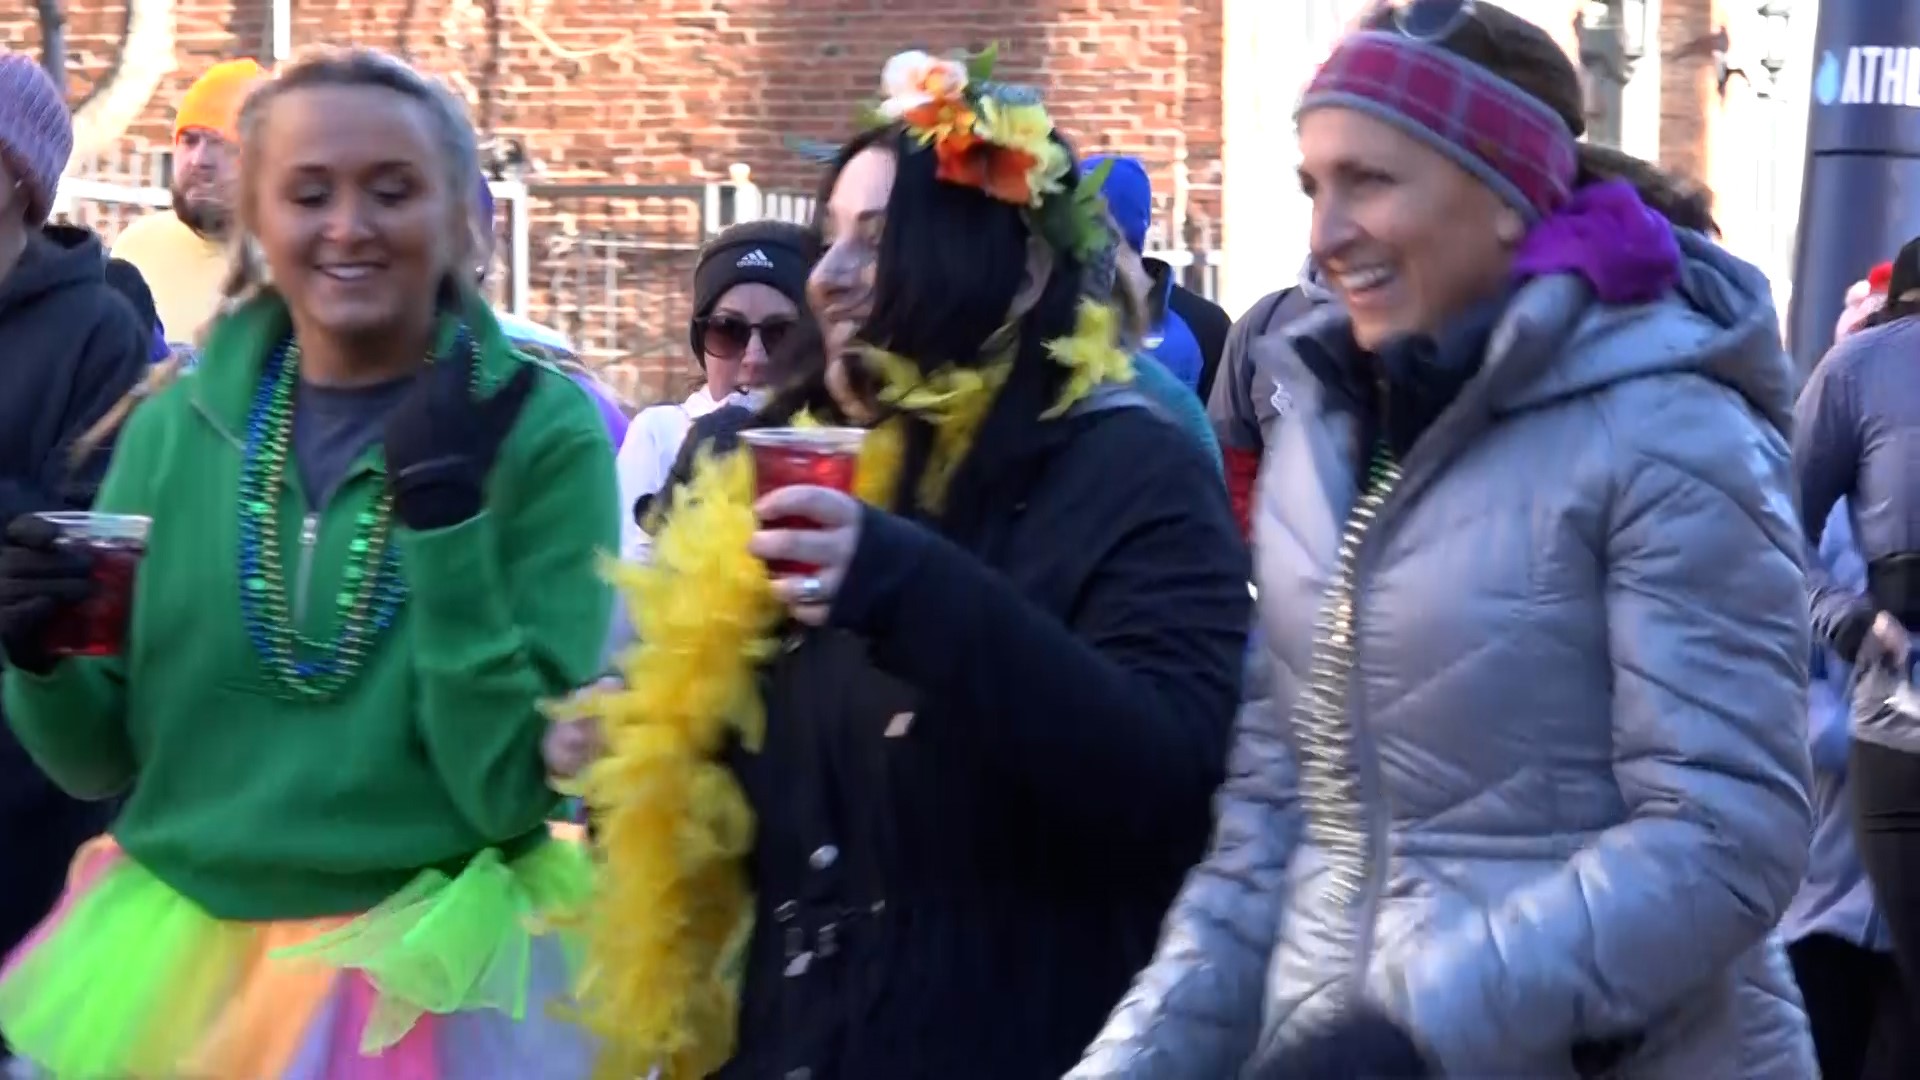 The neighborhood brought in people for the annual Run For Your Beads 5K and the Taste of Soulard.